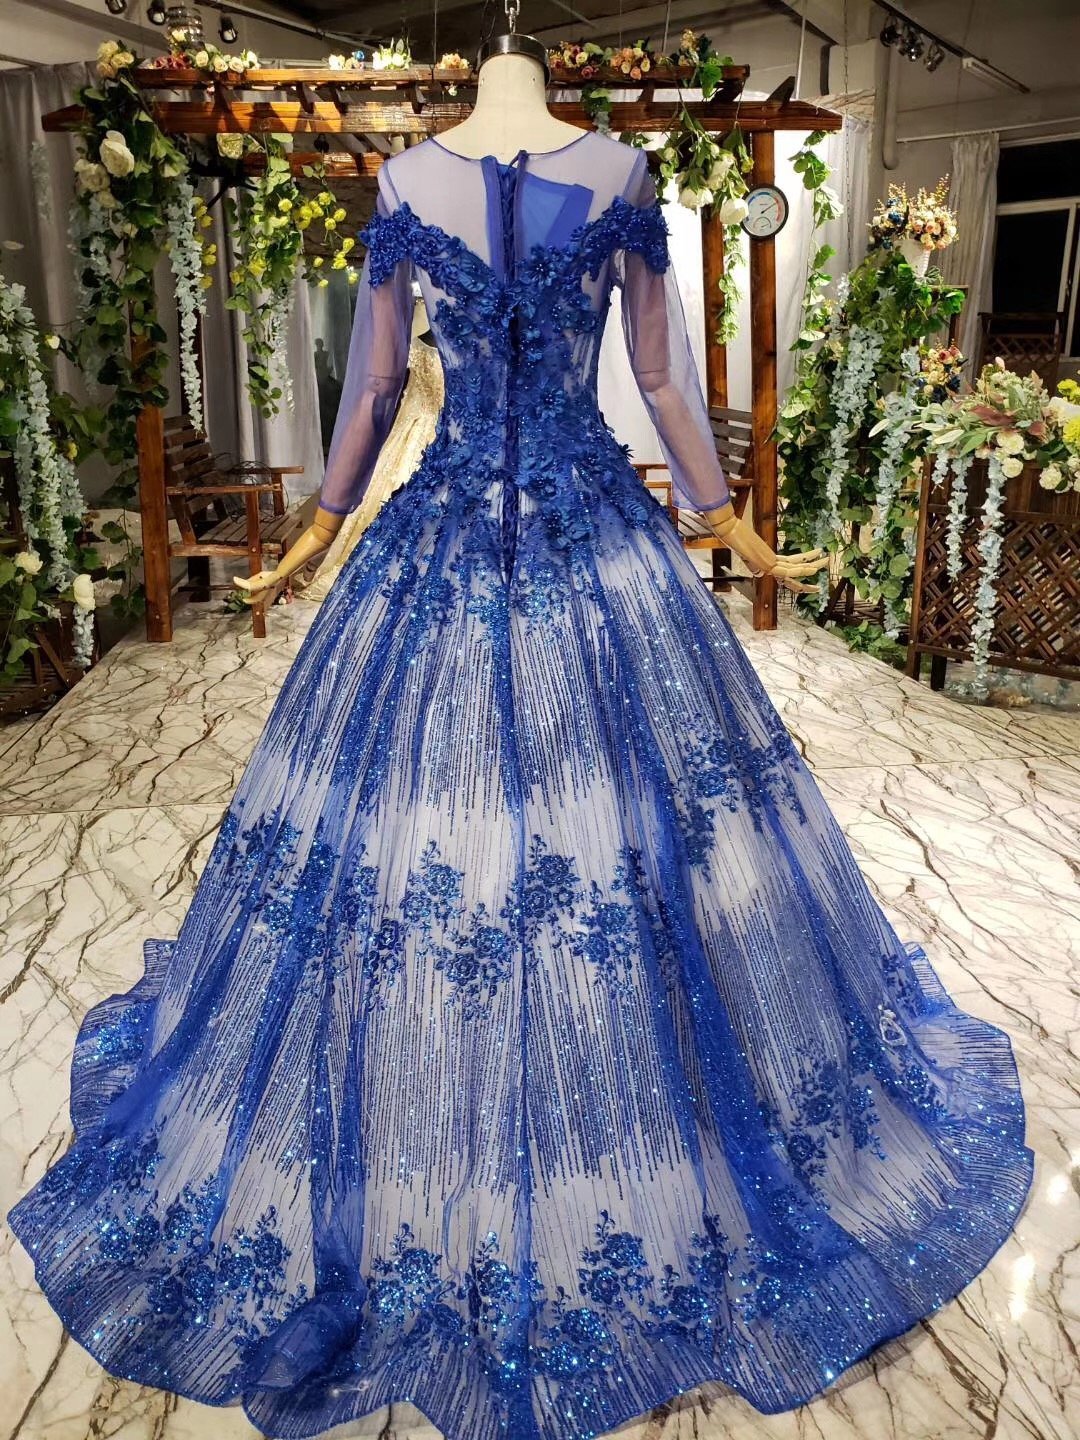 Charming Long Sleeve Round Neck Tulle Blue Beads Ball Gown Party Dresses with Lace up P1089 Rjerdress